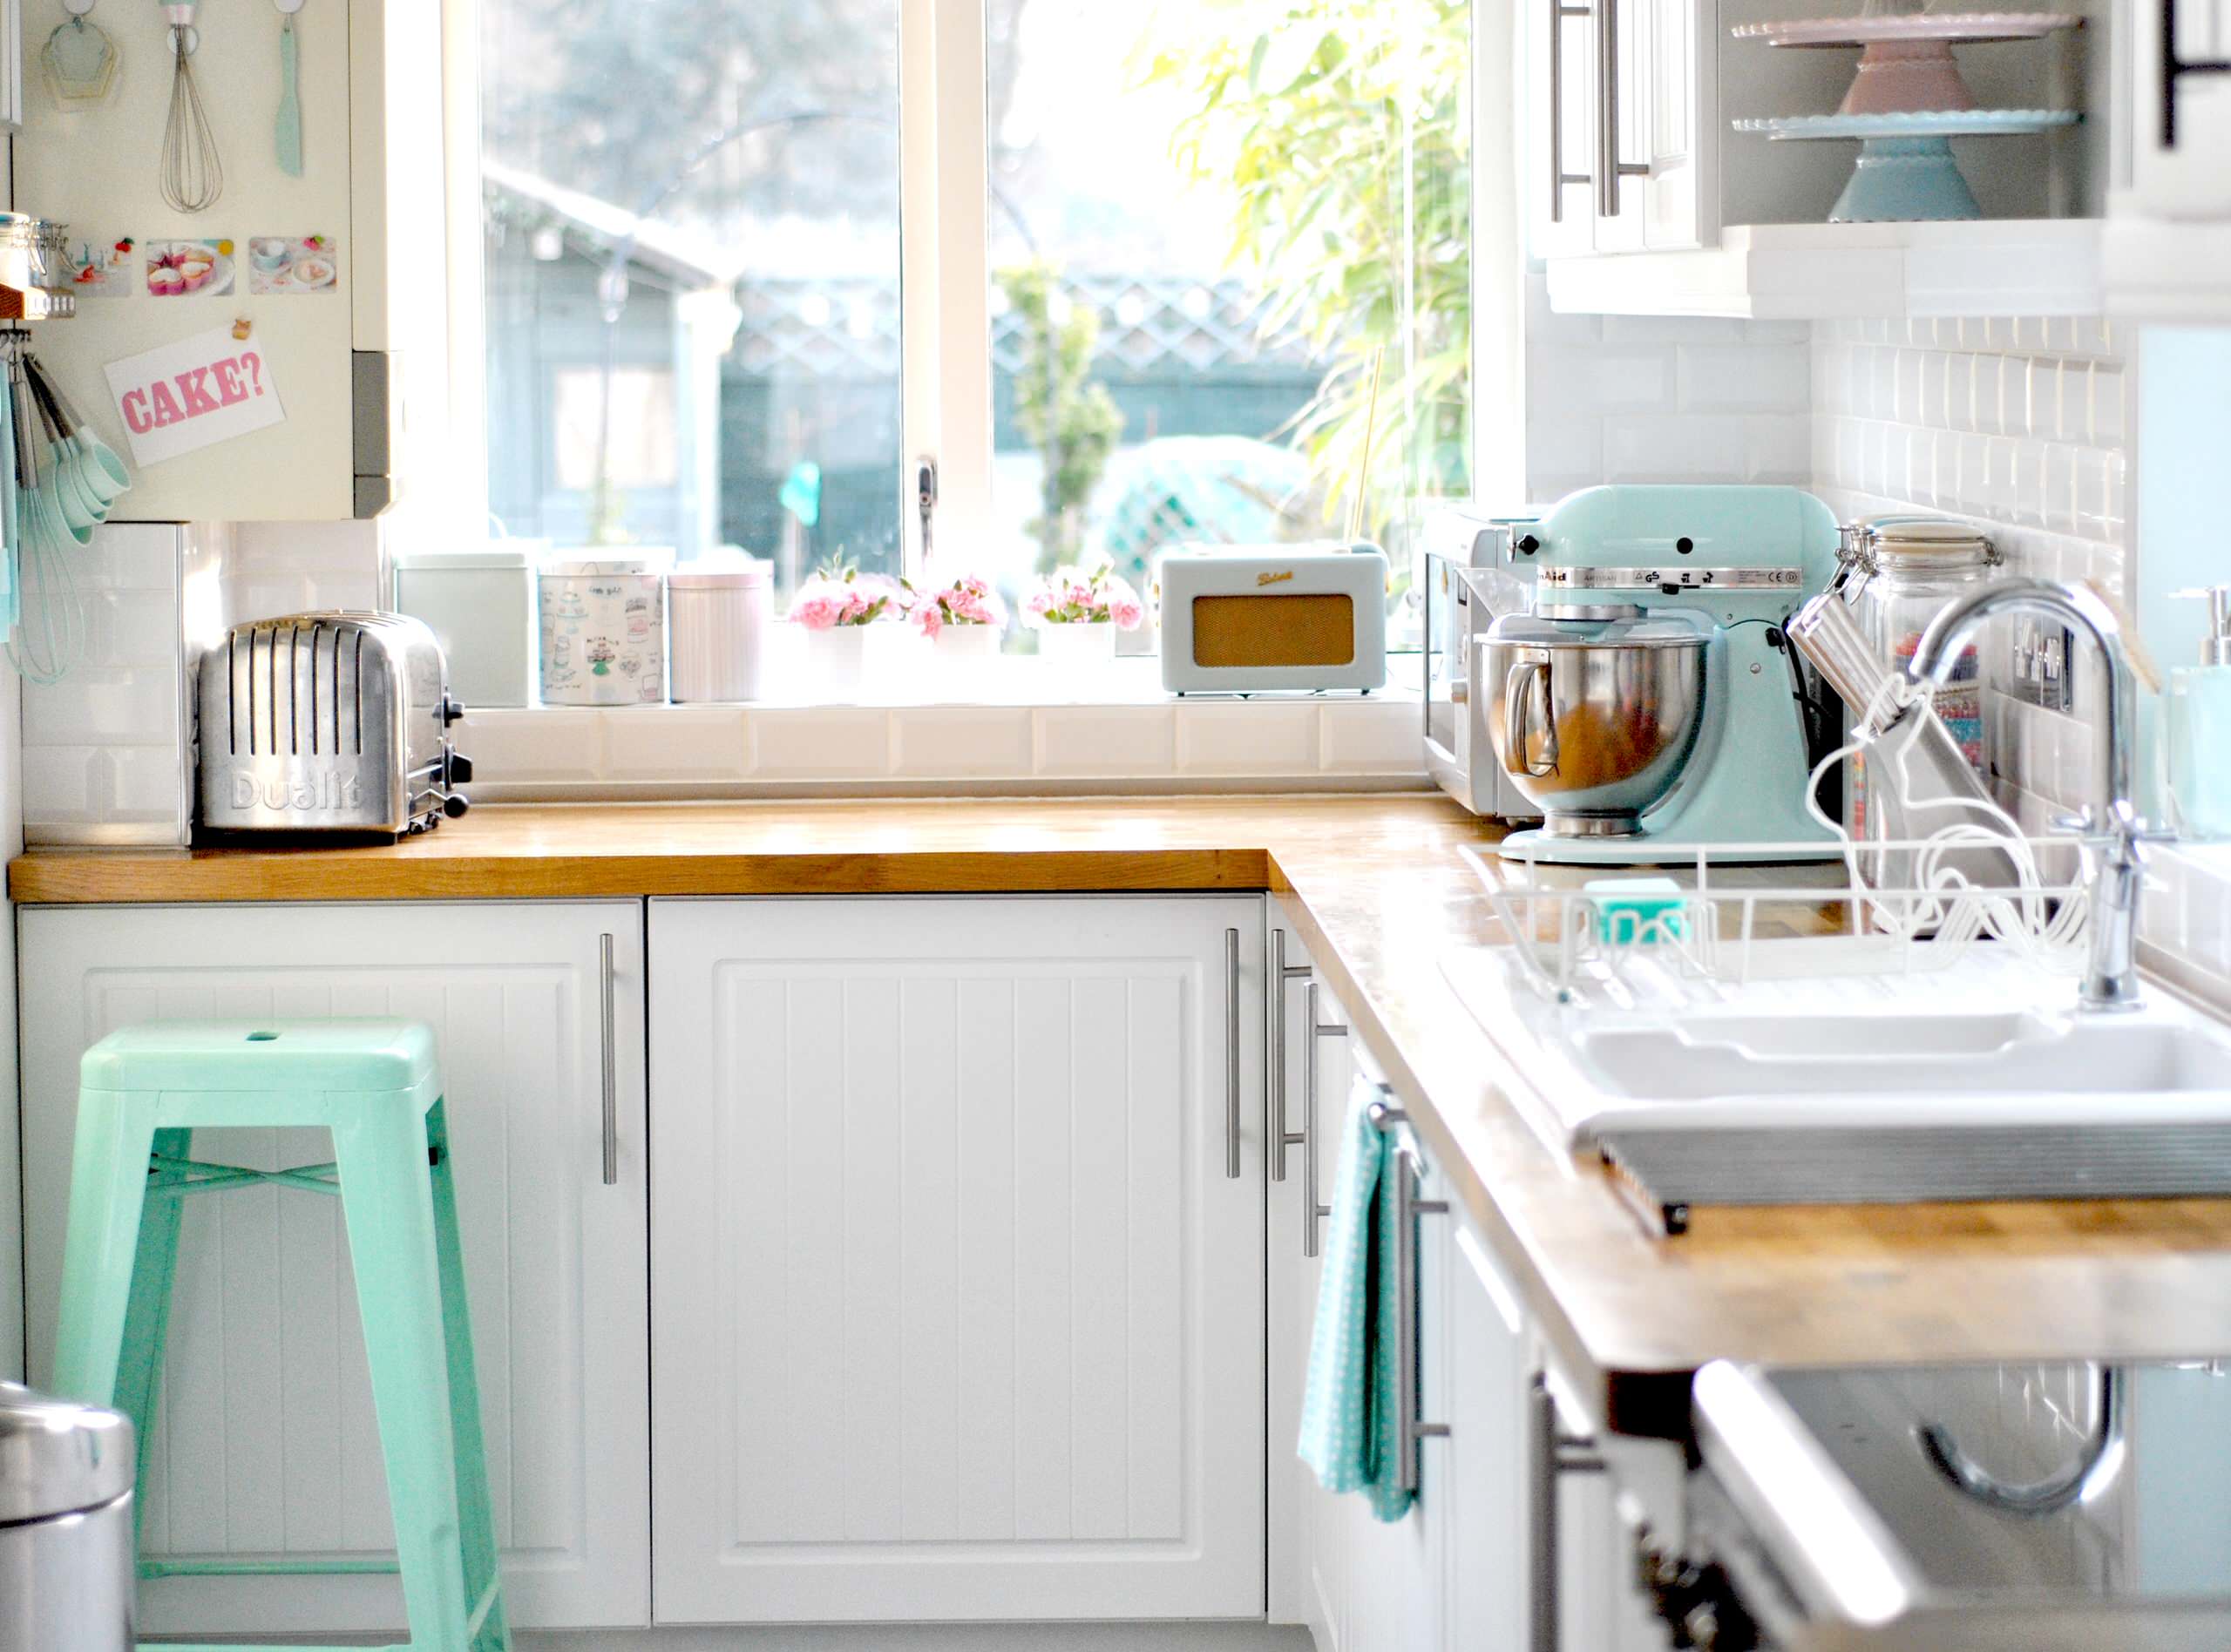 how to hide your kitchen appliances - Declutter in Minutes